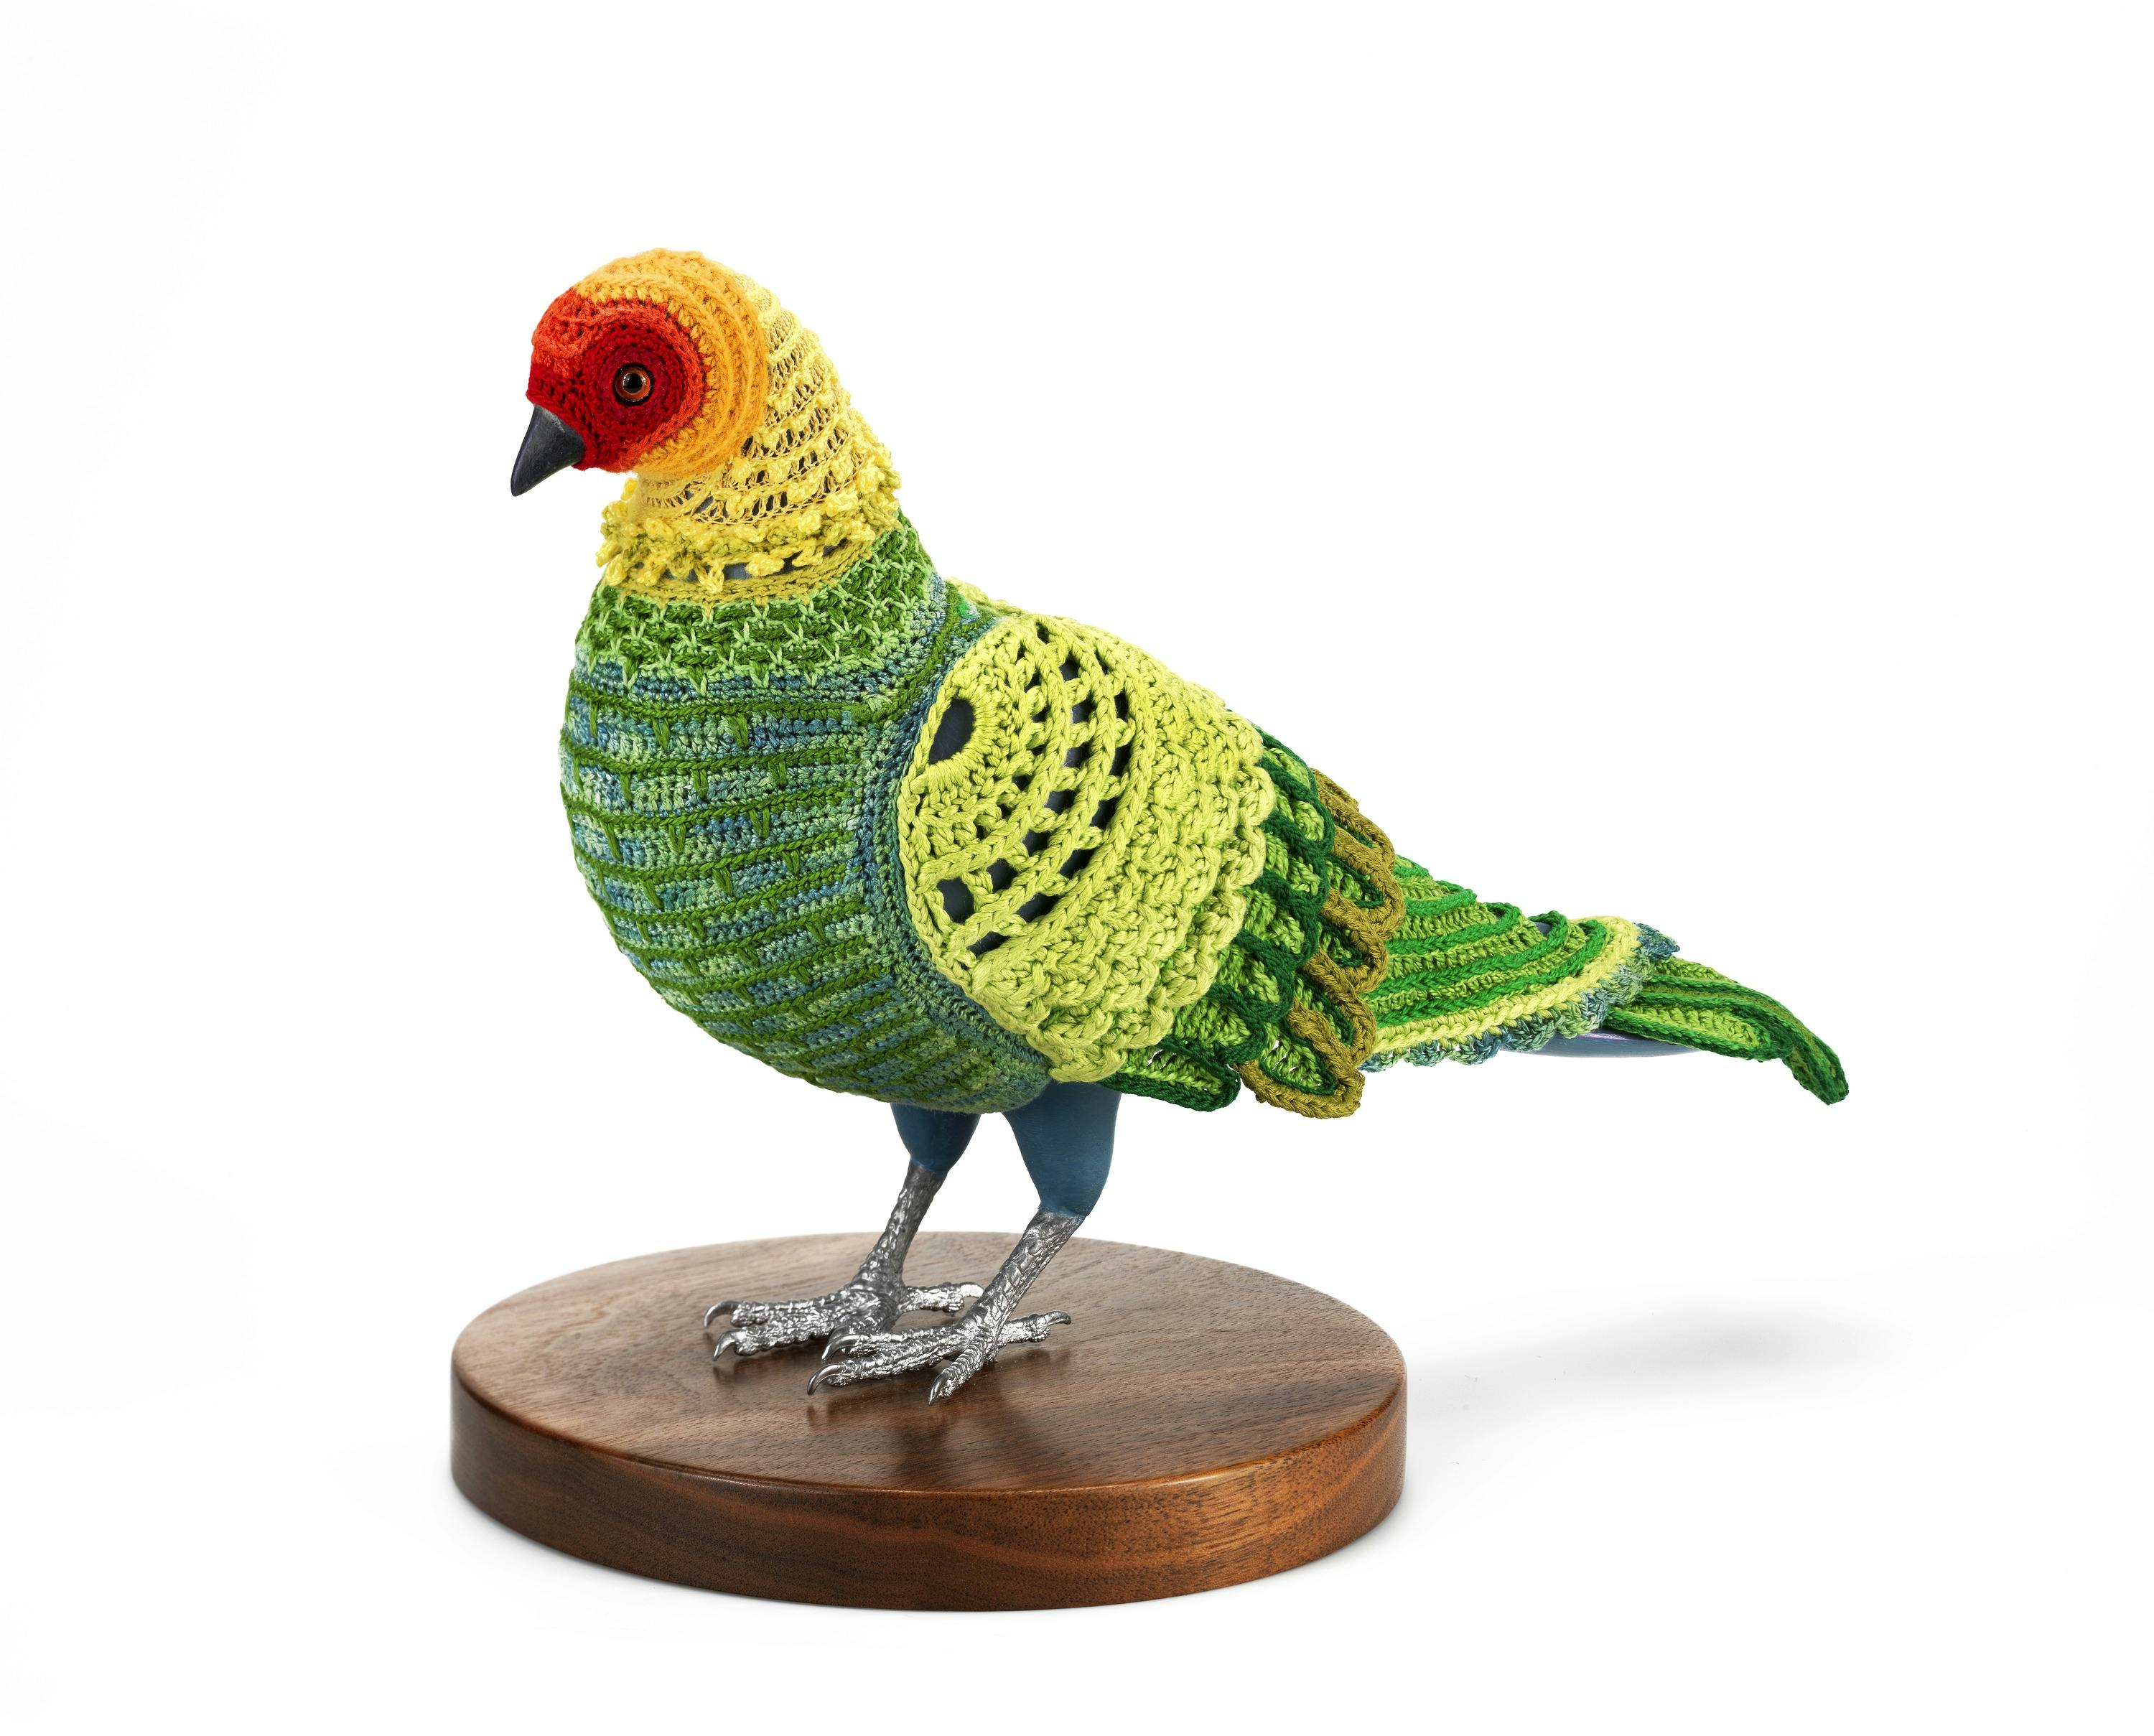 A crocheted suit with green, yellow, and red patterns on a pigeon mannequin, standing on a round wooden base